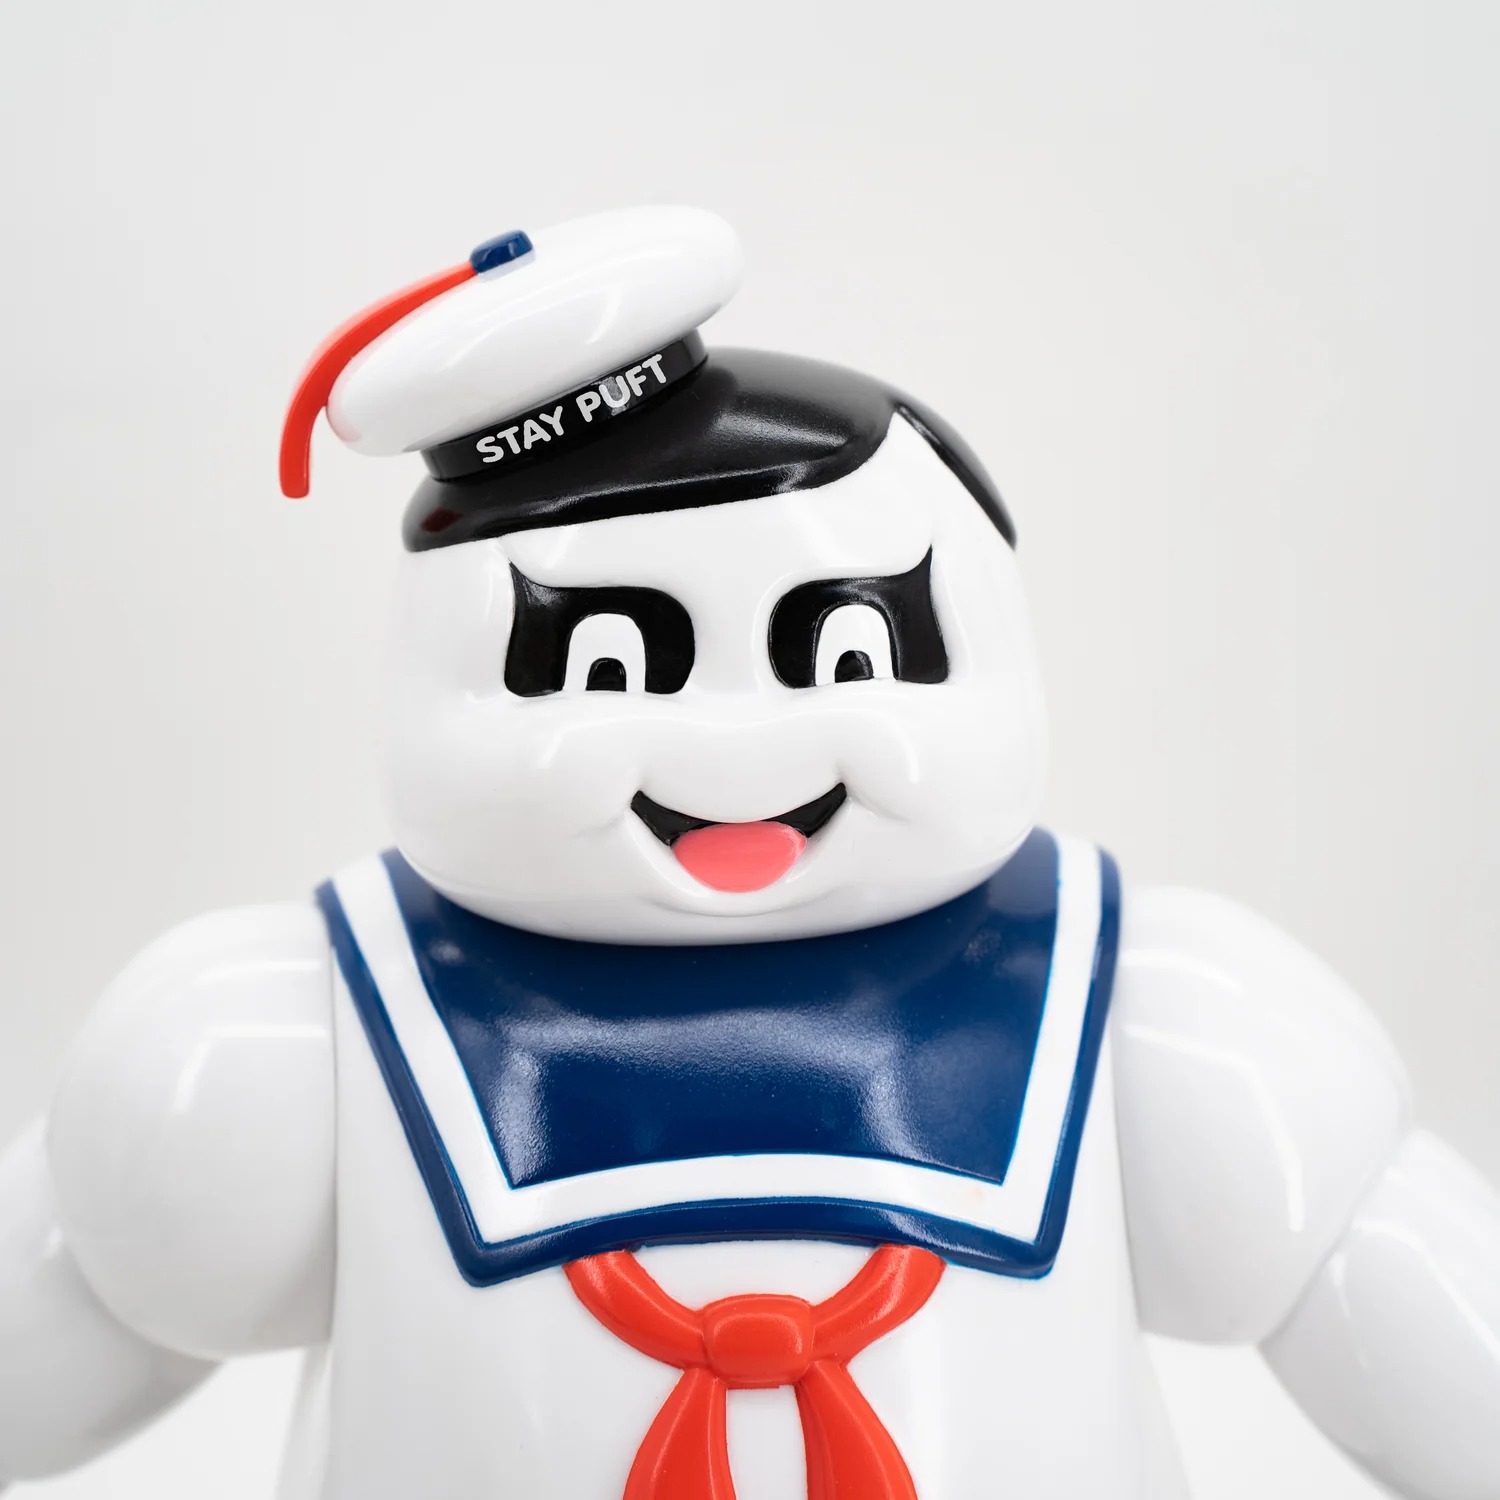 Punk Drunkers x Ghostbusters x Unbox Industries Stay Puft - The 